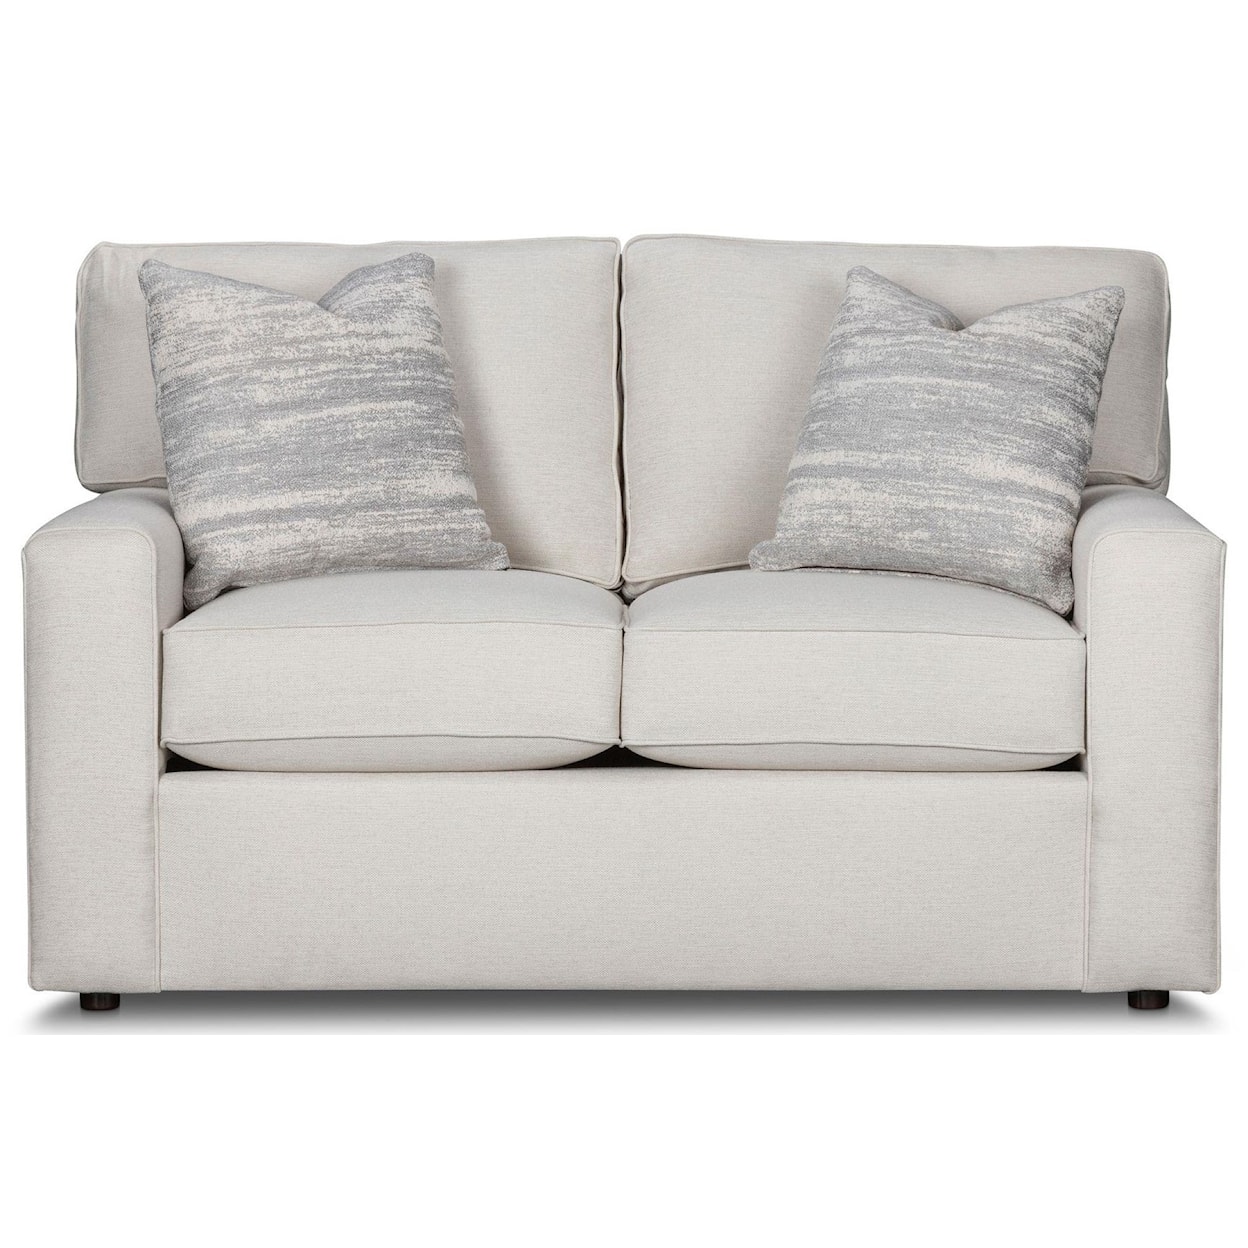 Stone & Leigh Furniture Leigh Upholstered Loveseat